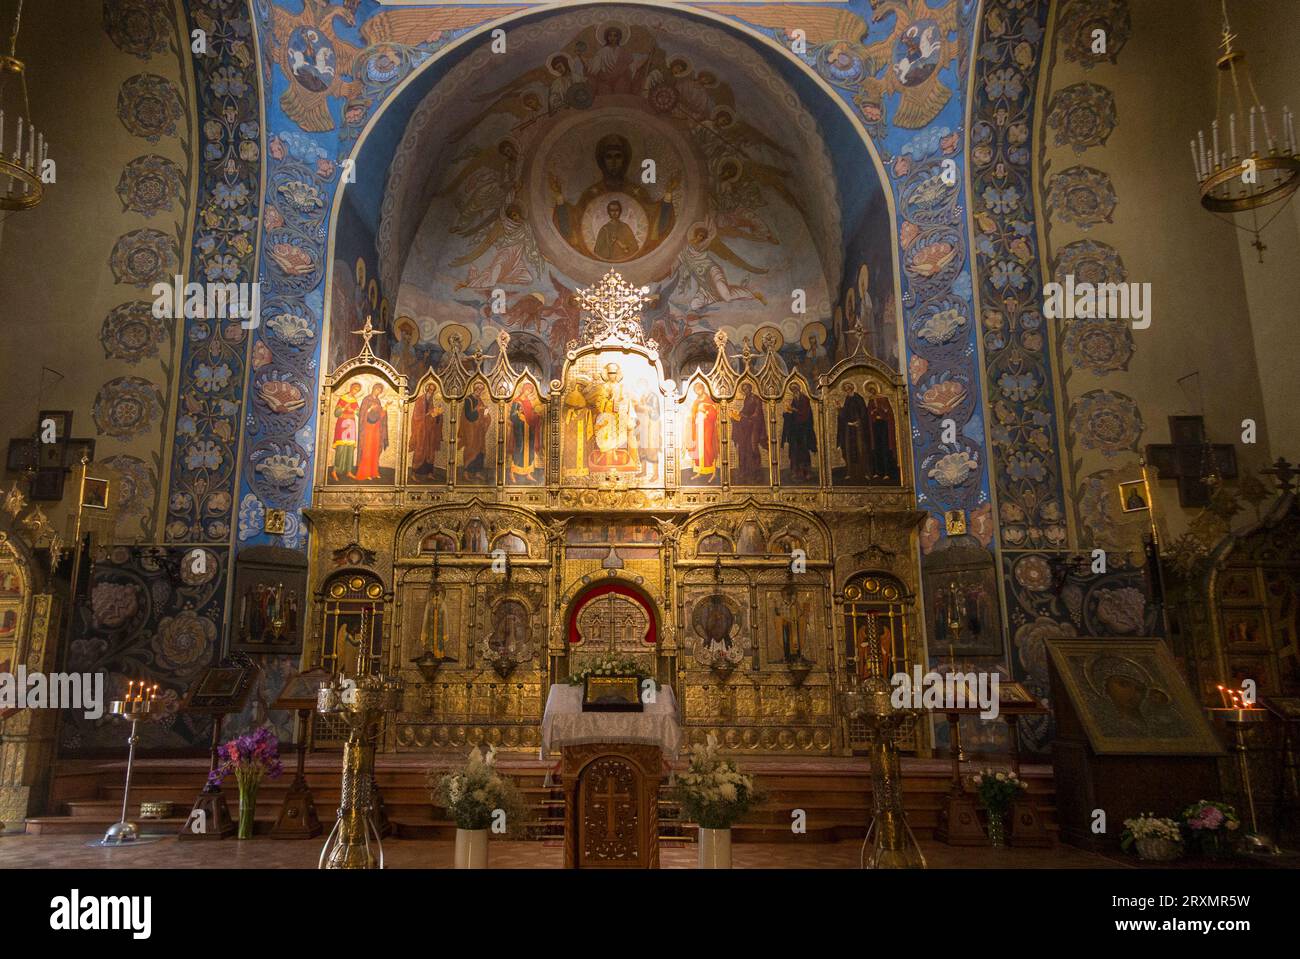 Looking up at images and paintings on the vaults of the altar apse at St Nicholas Orthodox Cathedral, Nice / Cathédrale Orthodoxe Saint-Nicolas de Nice. Russian Orthodox cathedral in France. The church altar is in the foreground. (135) Stock Photo